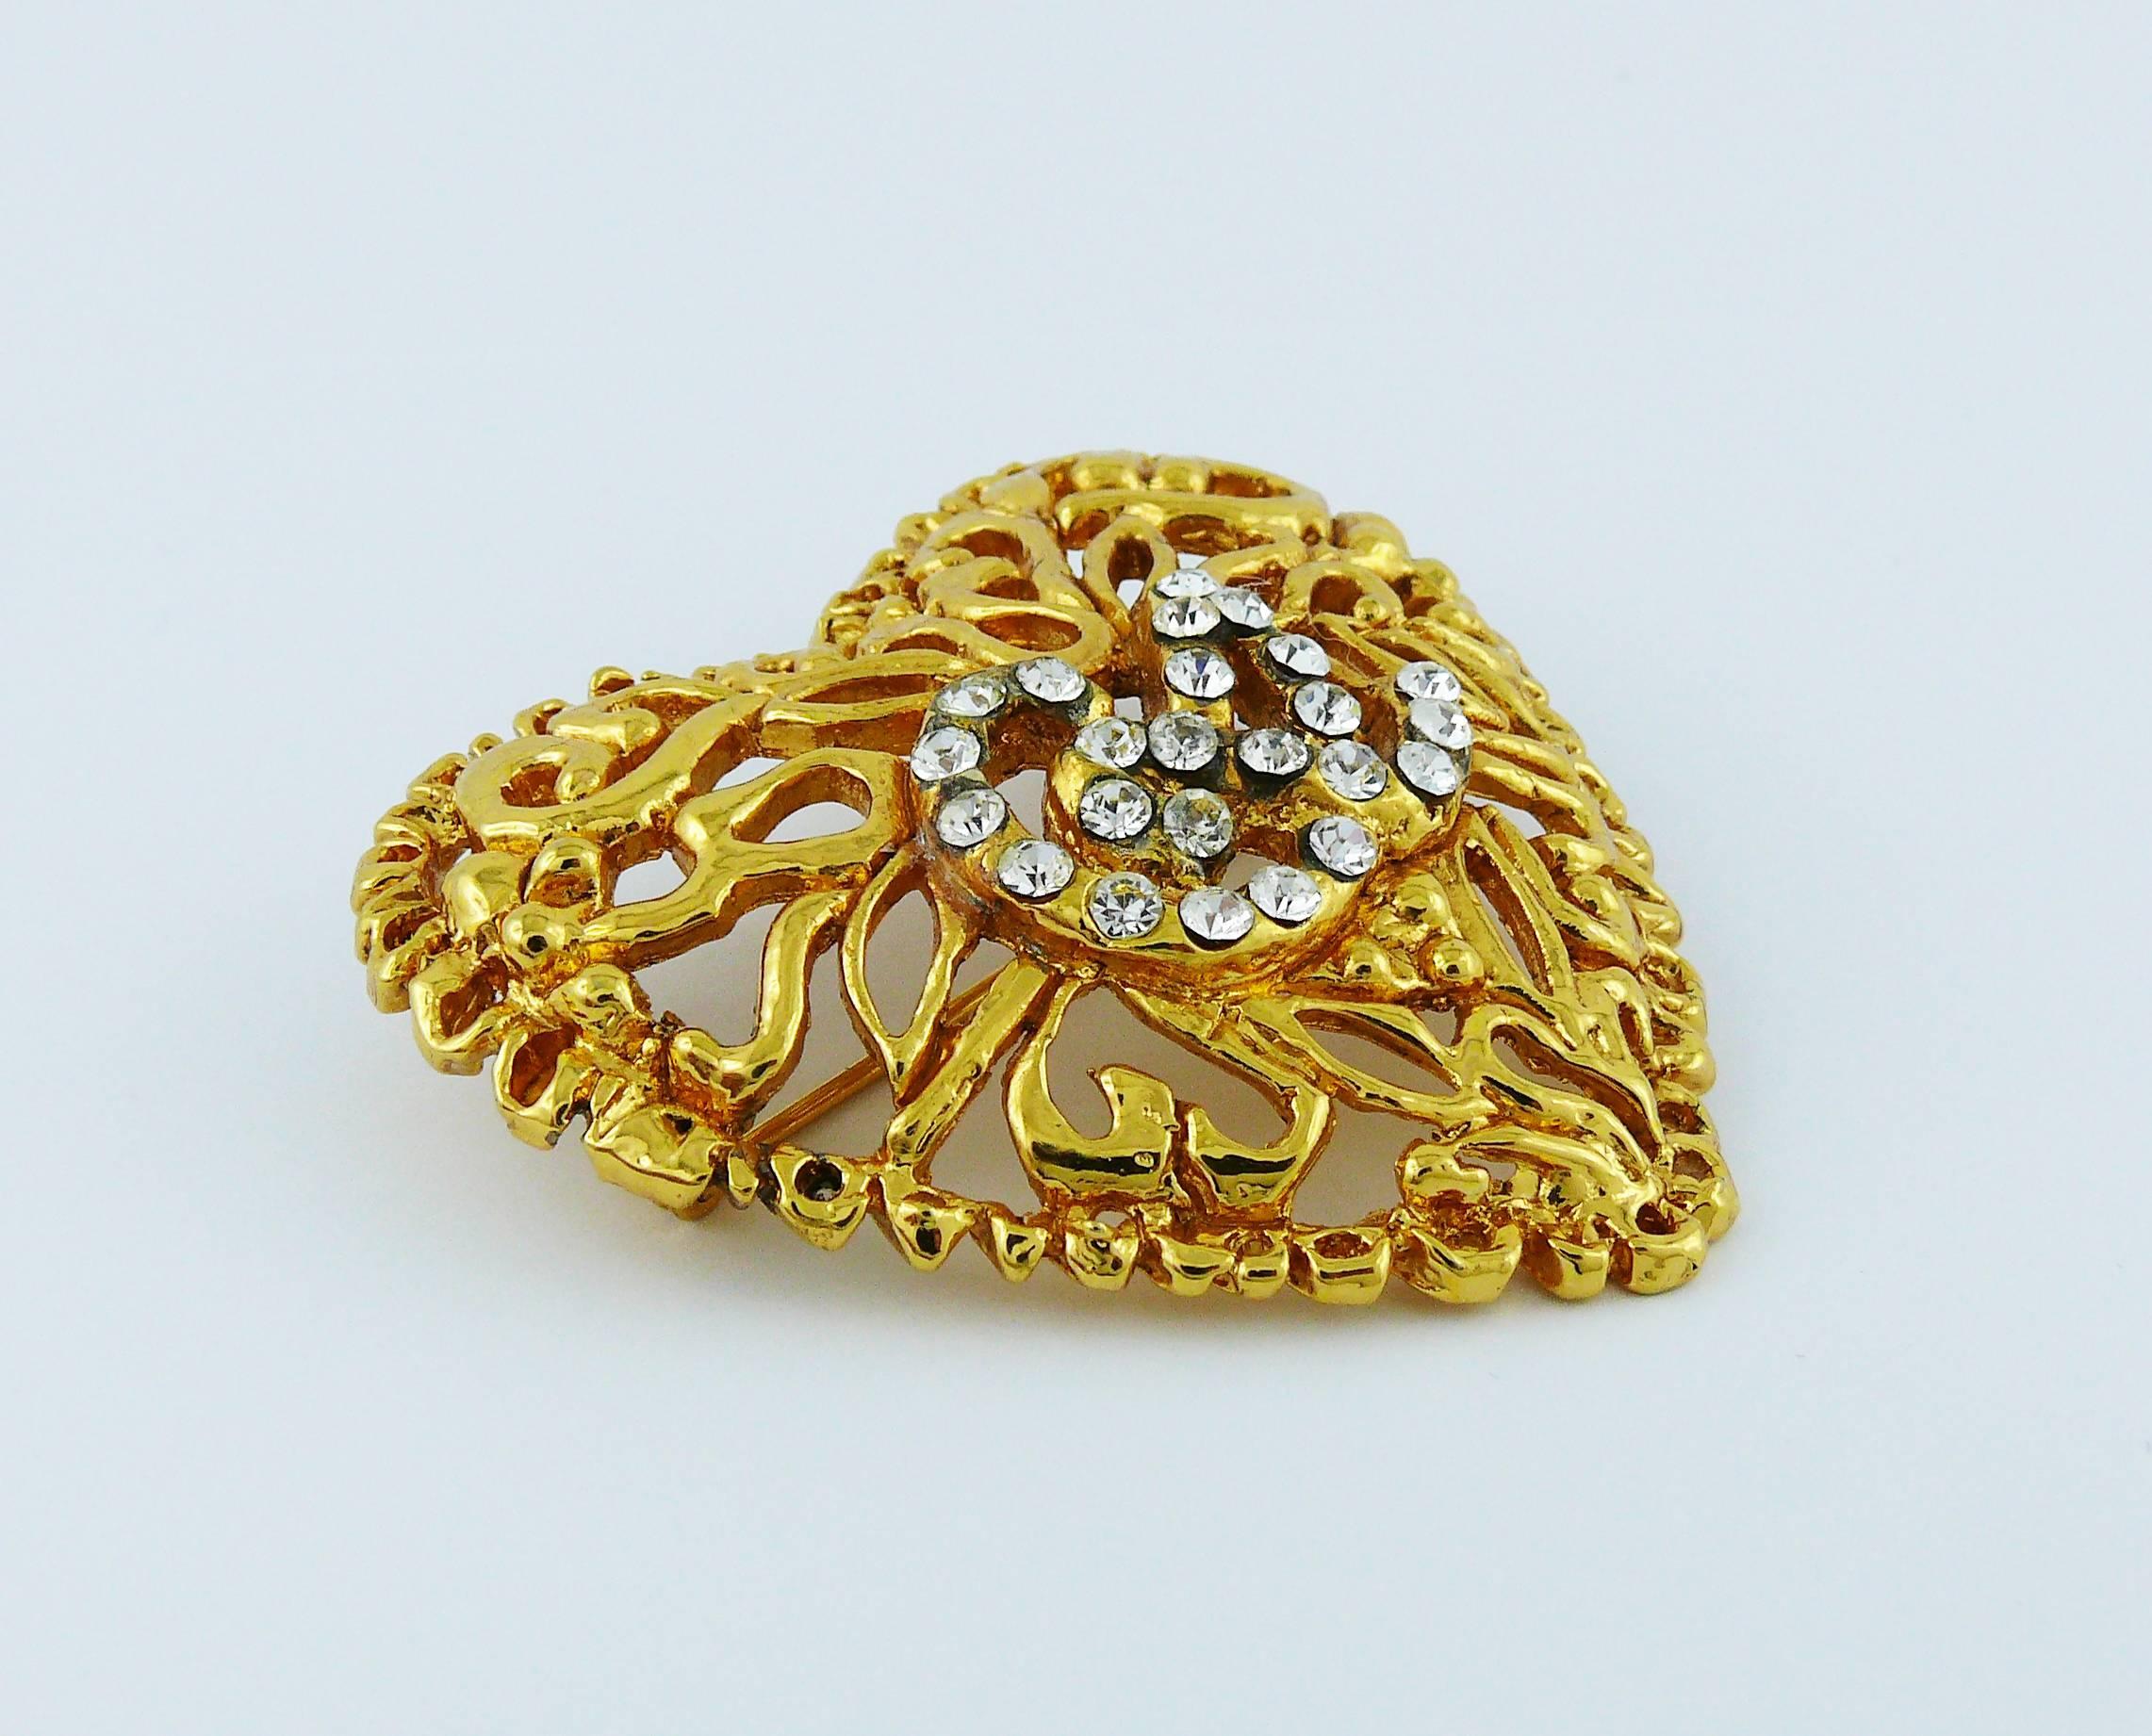 CHRISTIAN LACROIX vintage gold toned openwork heart brooch featuring clear crystal CL monogram.

Marked CHRISTIAN LACROIX CL Made in France.

Indicative measurements : max. height approx. 5.2 cm (2.05 inches) / max. width approx. 5.5 cm (2.17